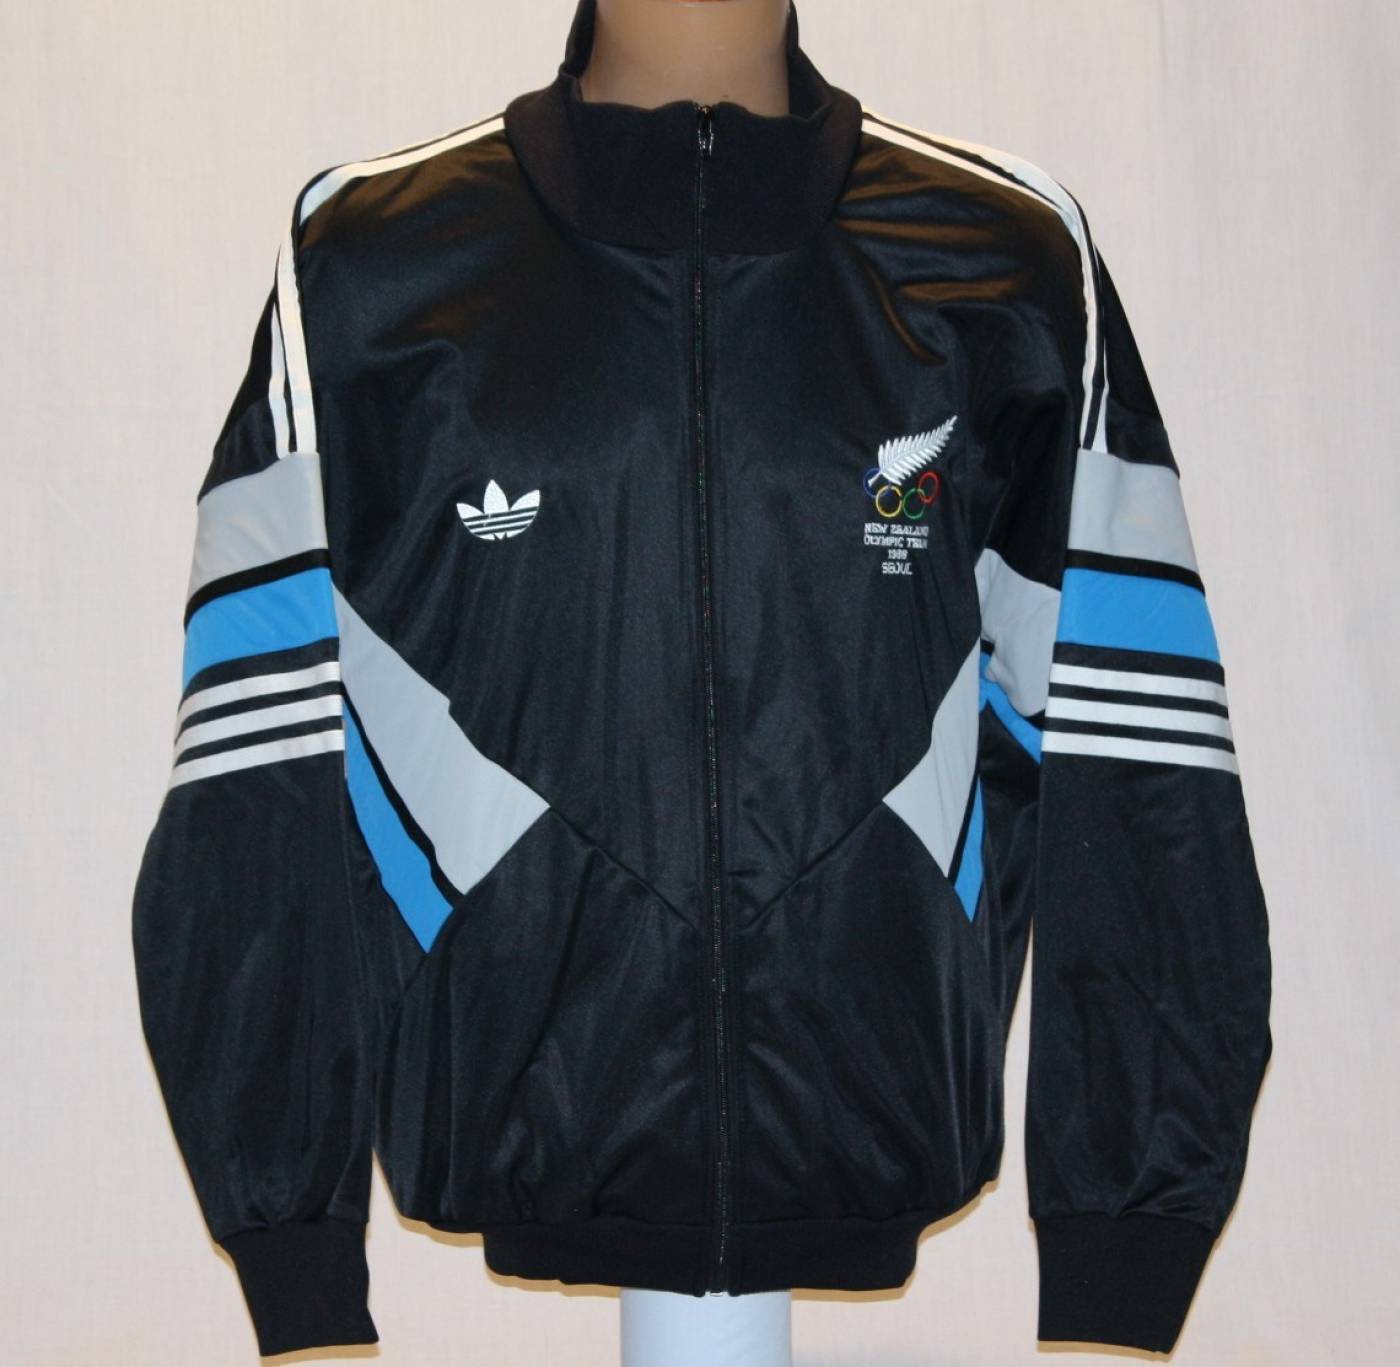 Tracksuit jacket of the New Zealand Olympic team at the Games of the ...